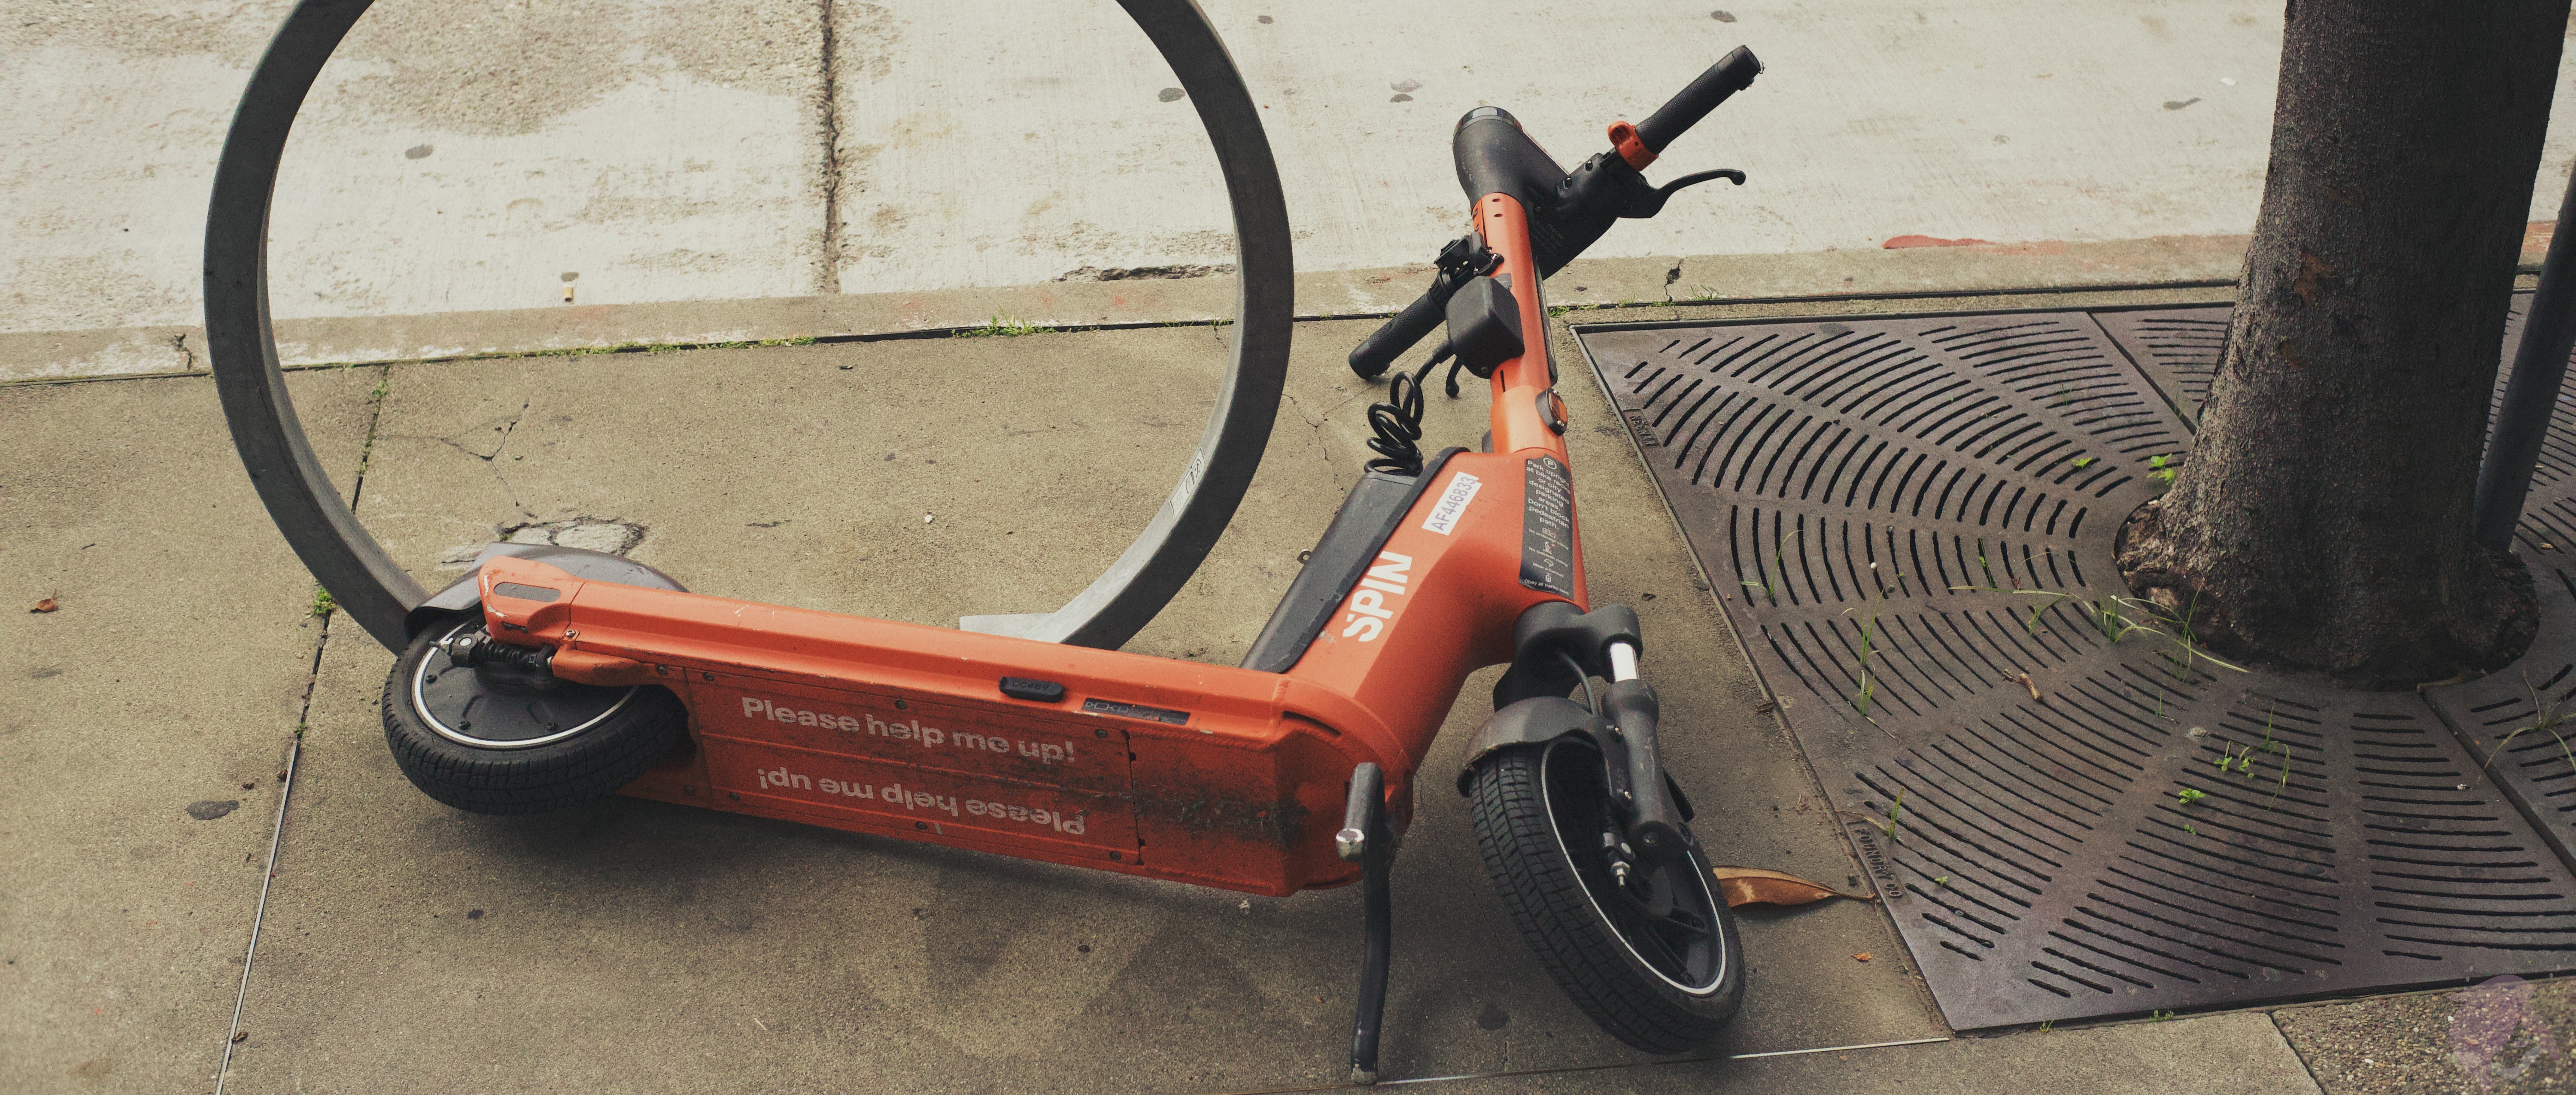 An image of A red electric scooter on its side with the label 'Please help me up' on it.